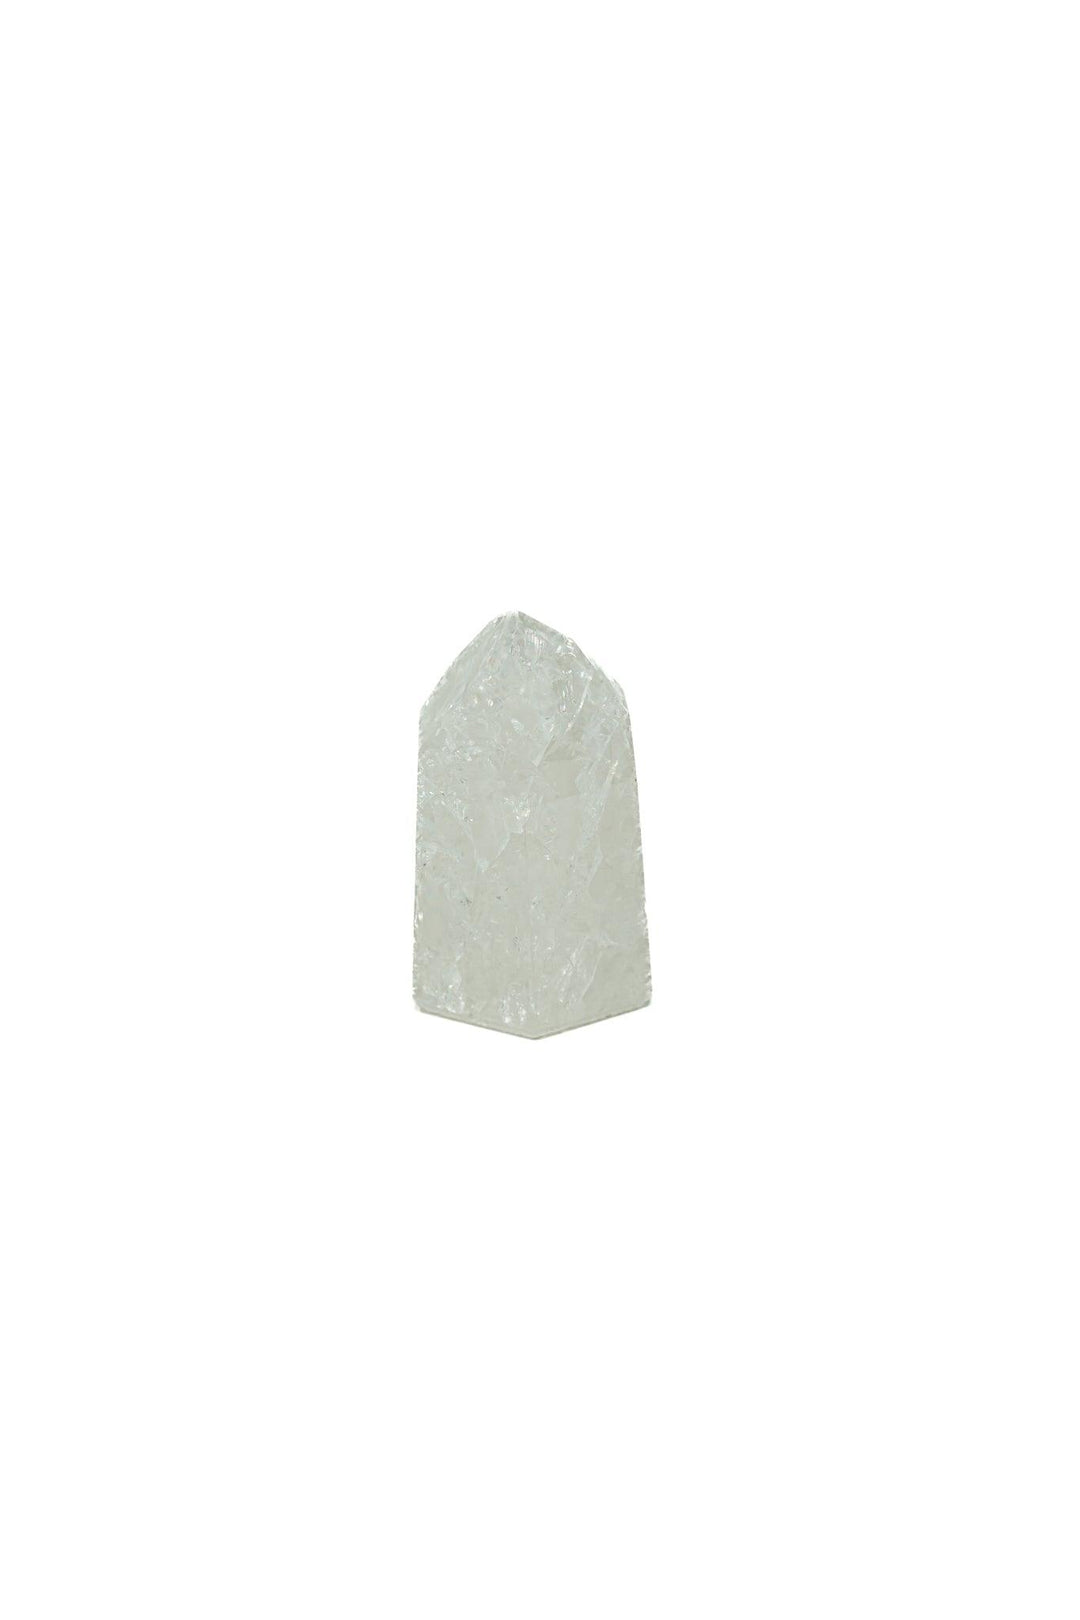 Cracked Clear Quartz Tower - The Harmony Store